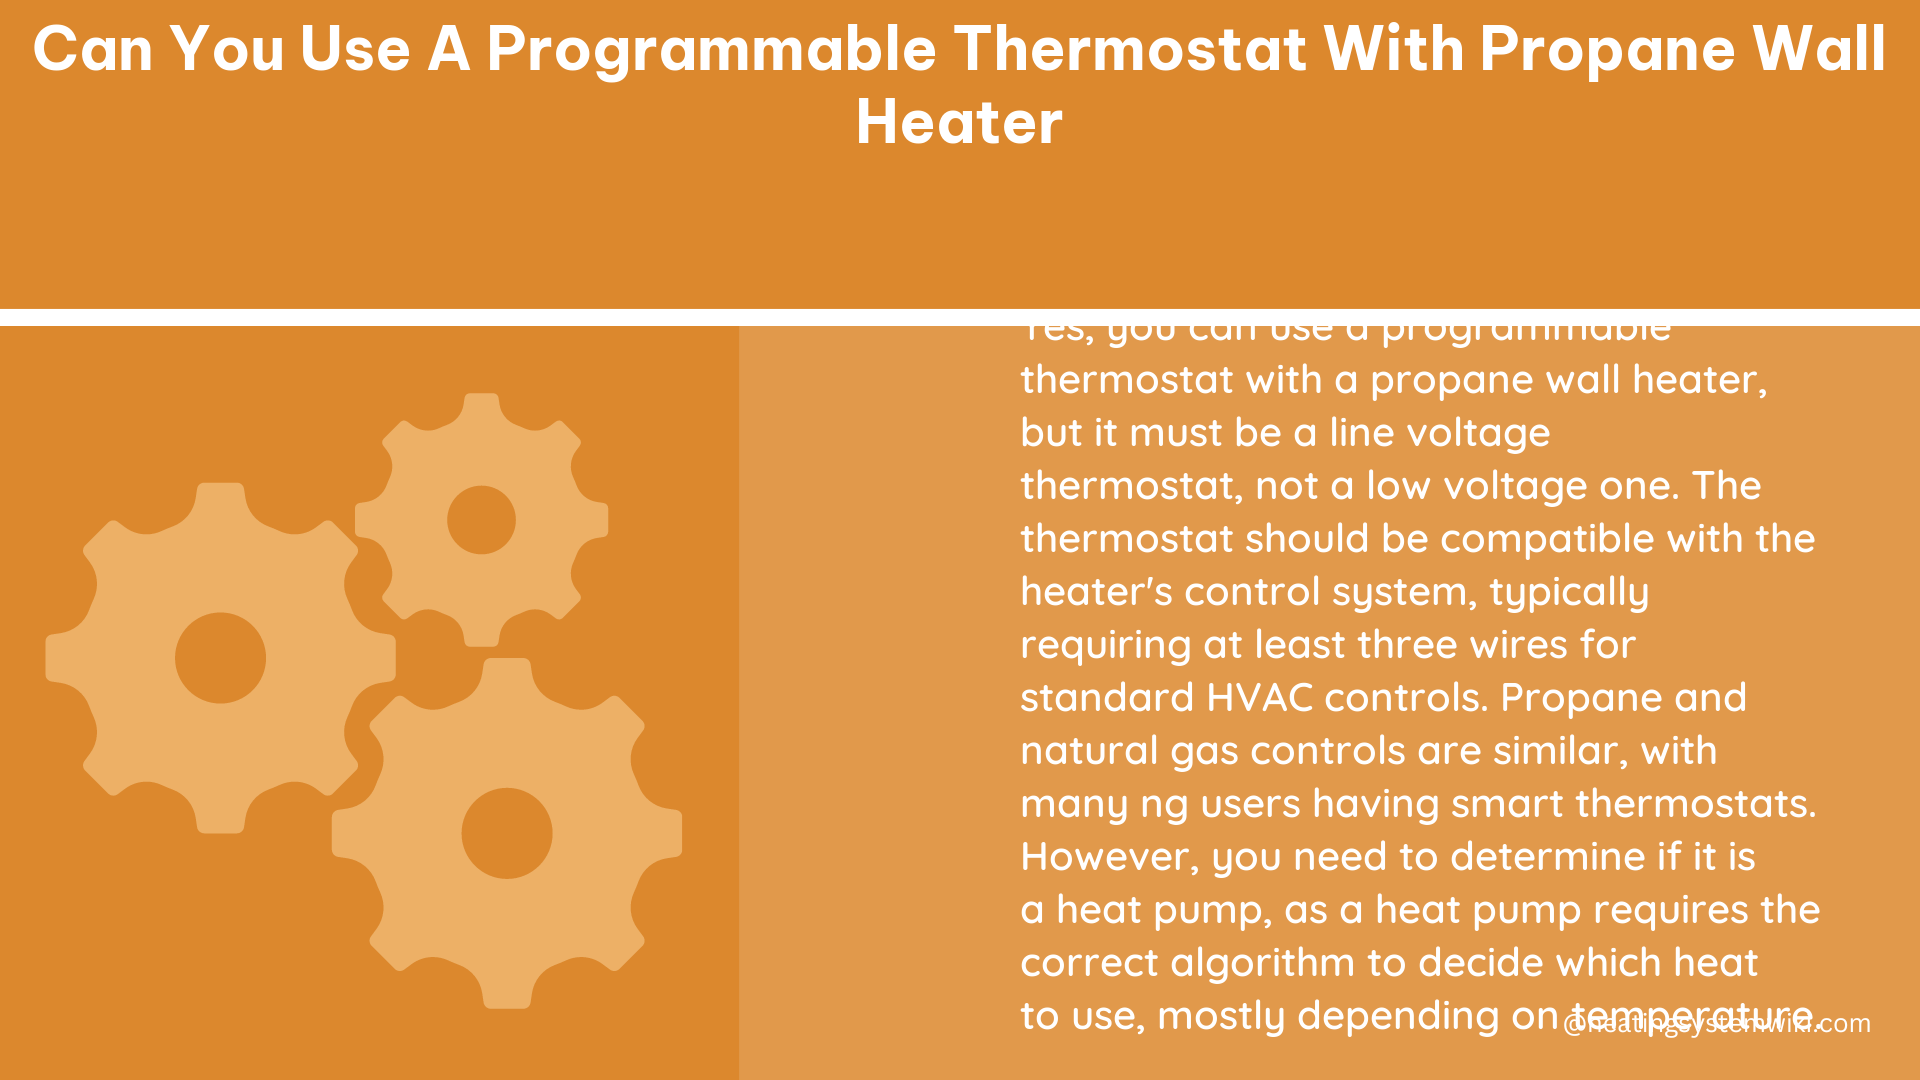 can you use a programmable thermostat with propane wall heater